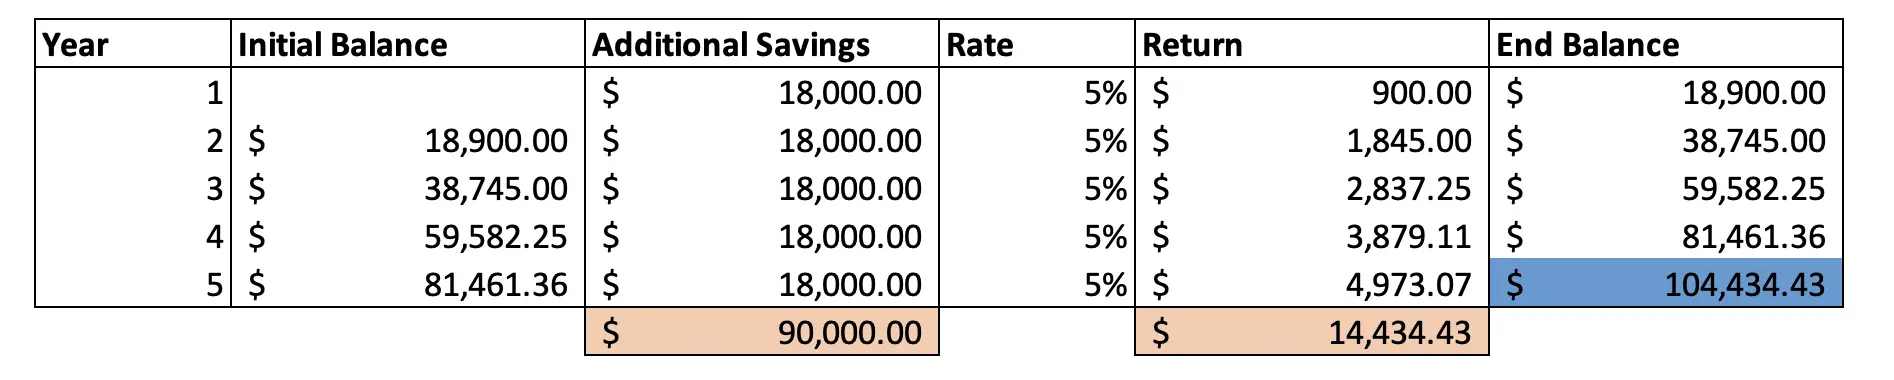 $100,000 in 5 years by saving $18,000 a year with a 5% return